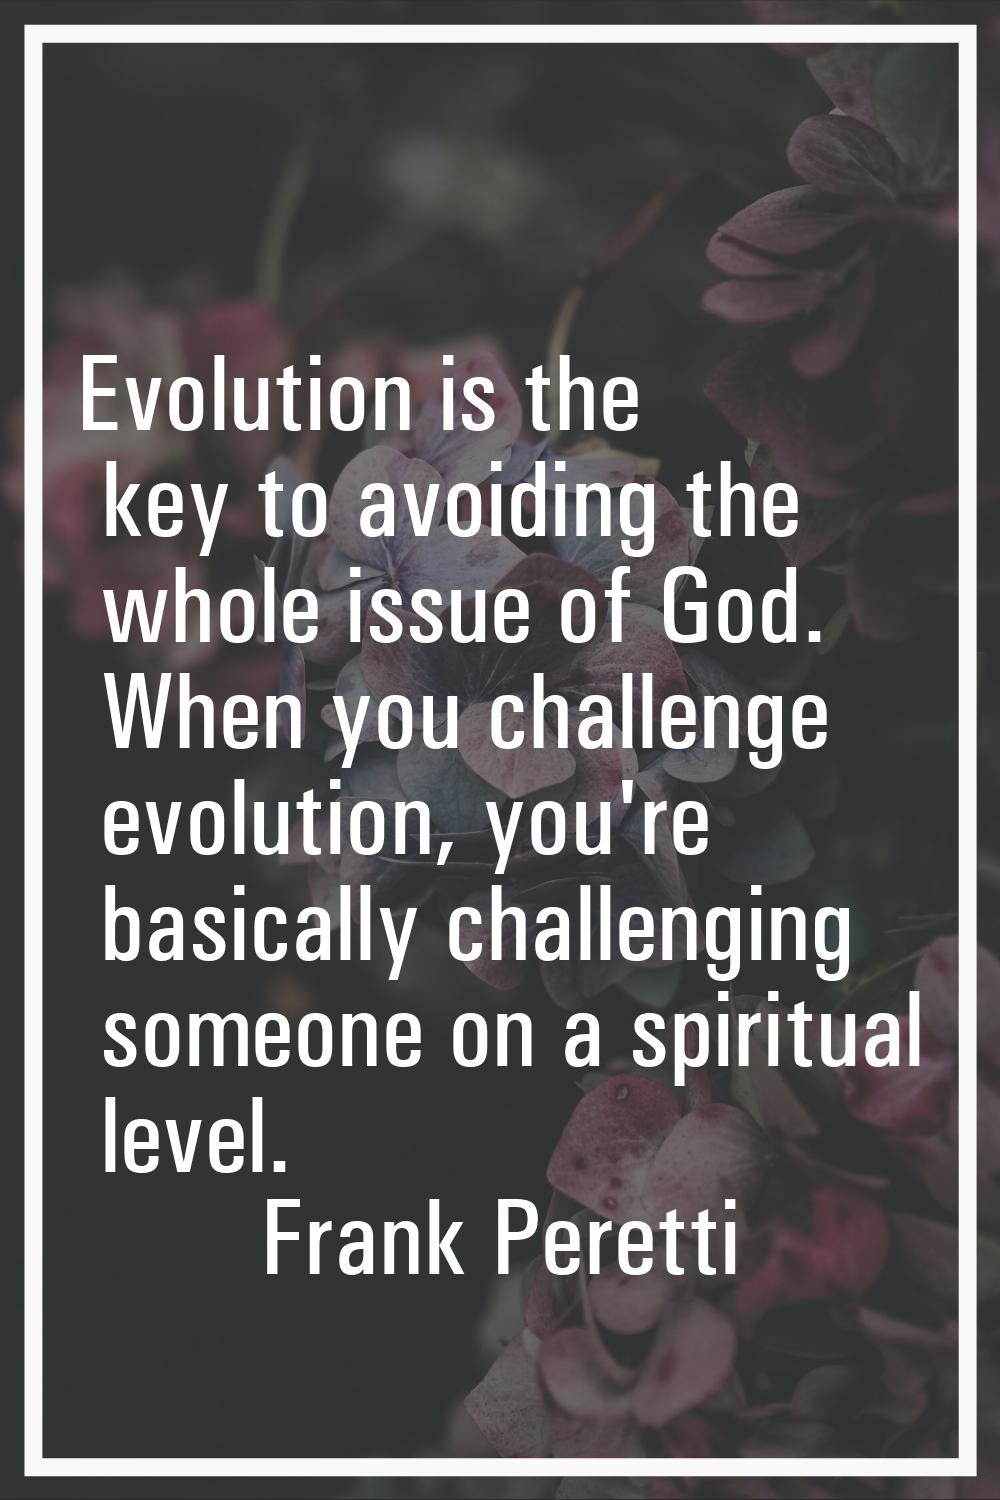 Evolution is the key to avoiding the whole issue of God. When you challenge evolution, you're basic